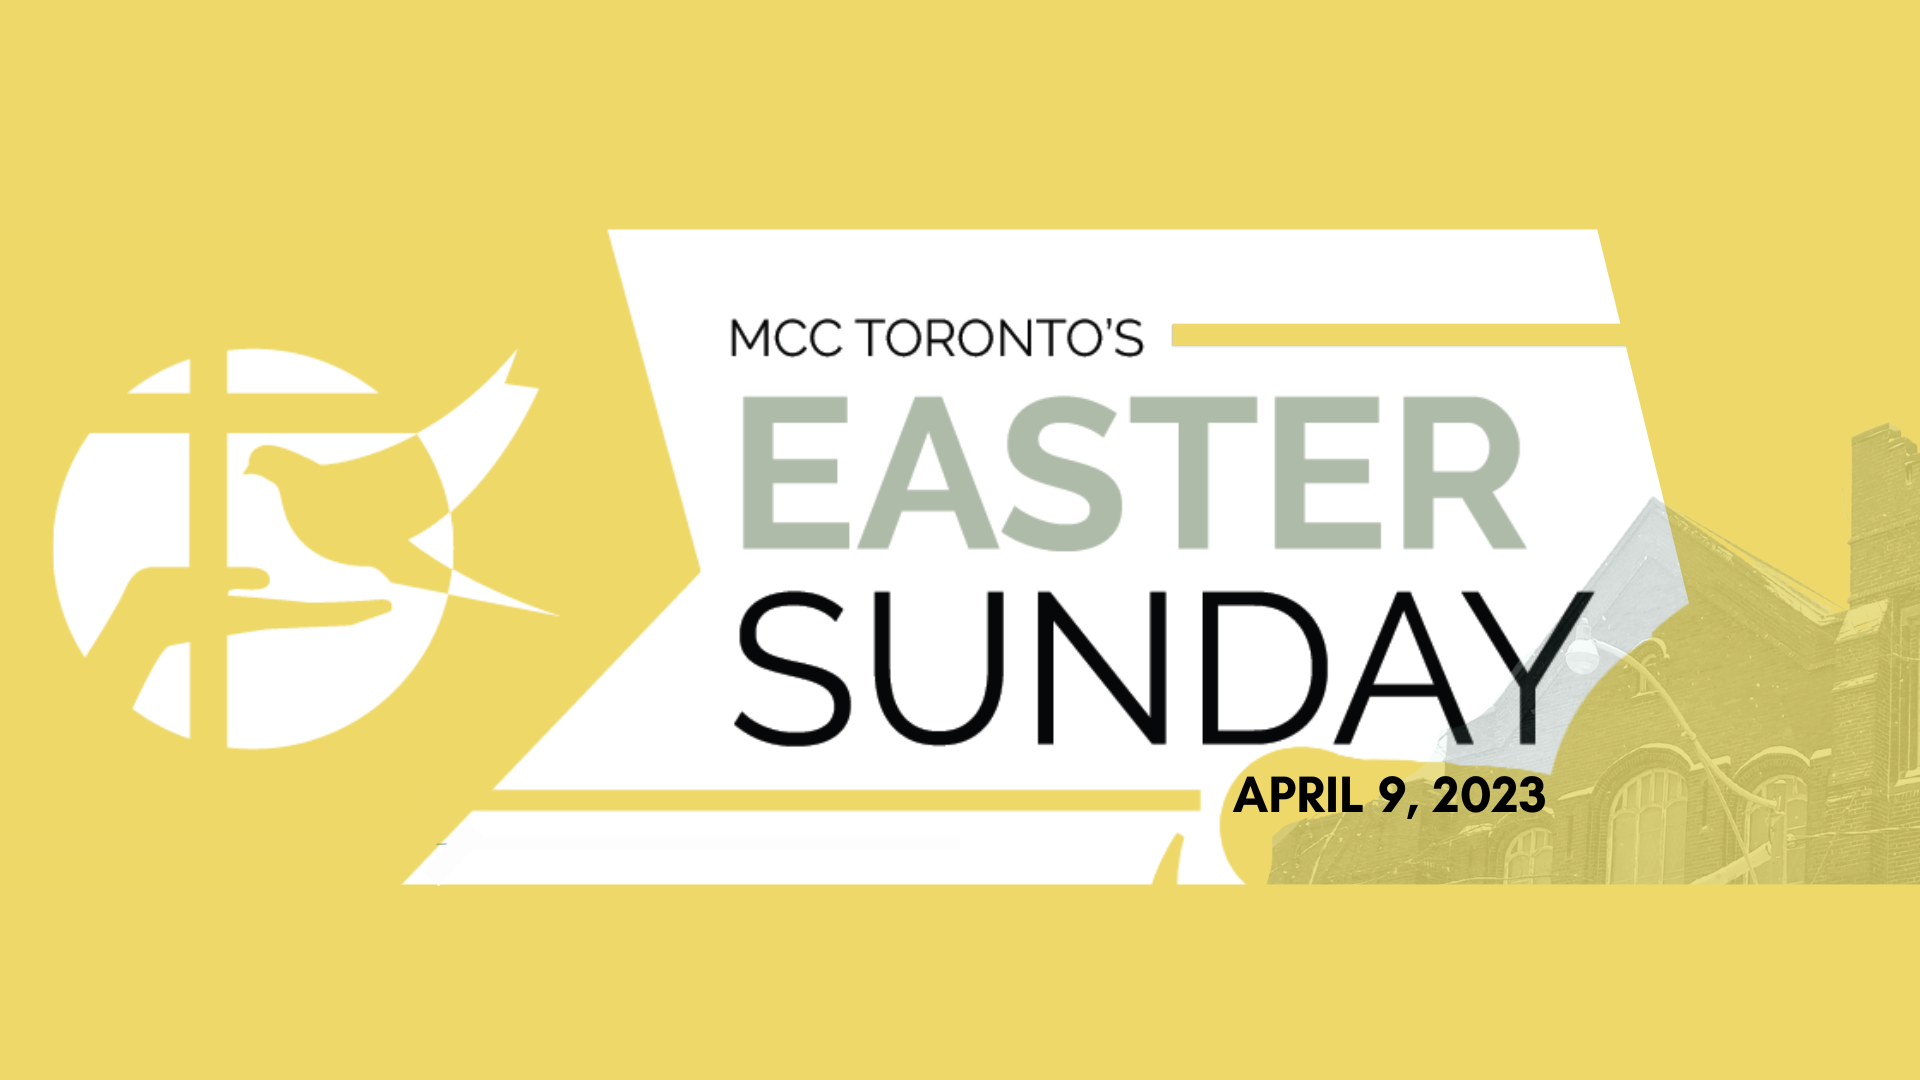 Picture of MCC Toronto logo and building with text saying MCC Toronto's Easter Sunday April 9, 2023